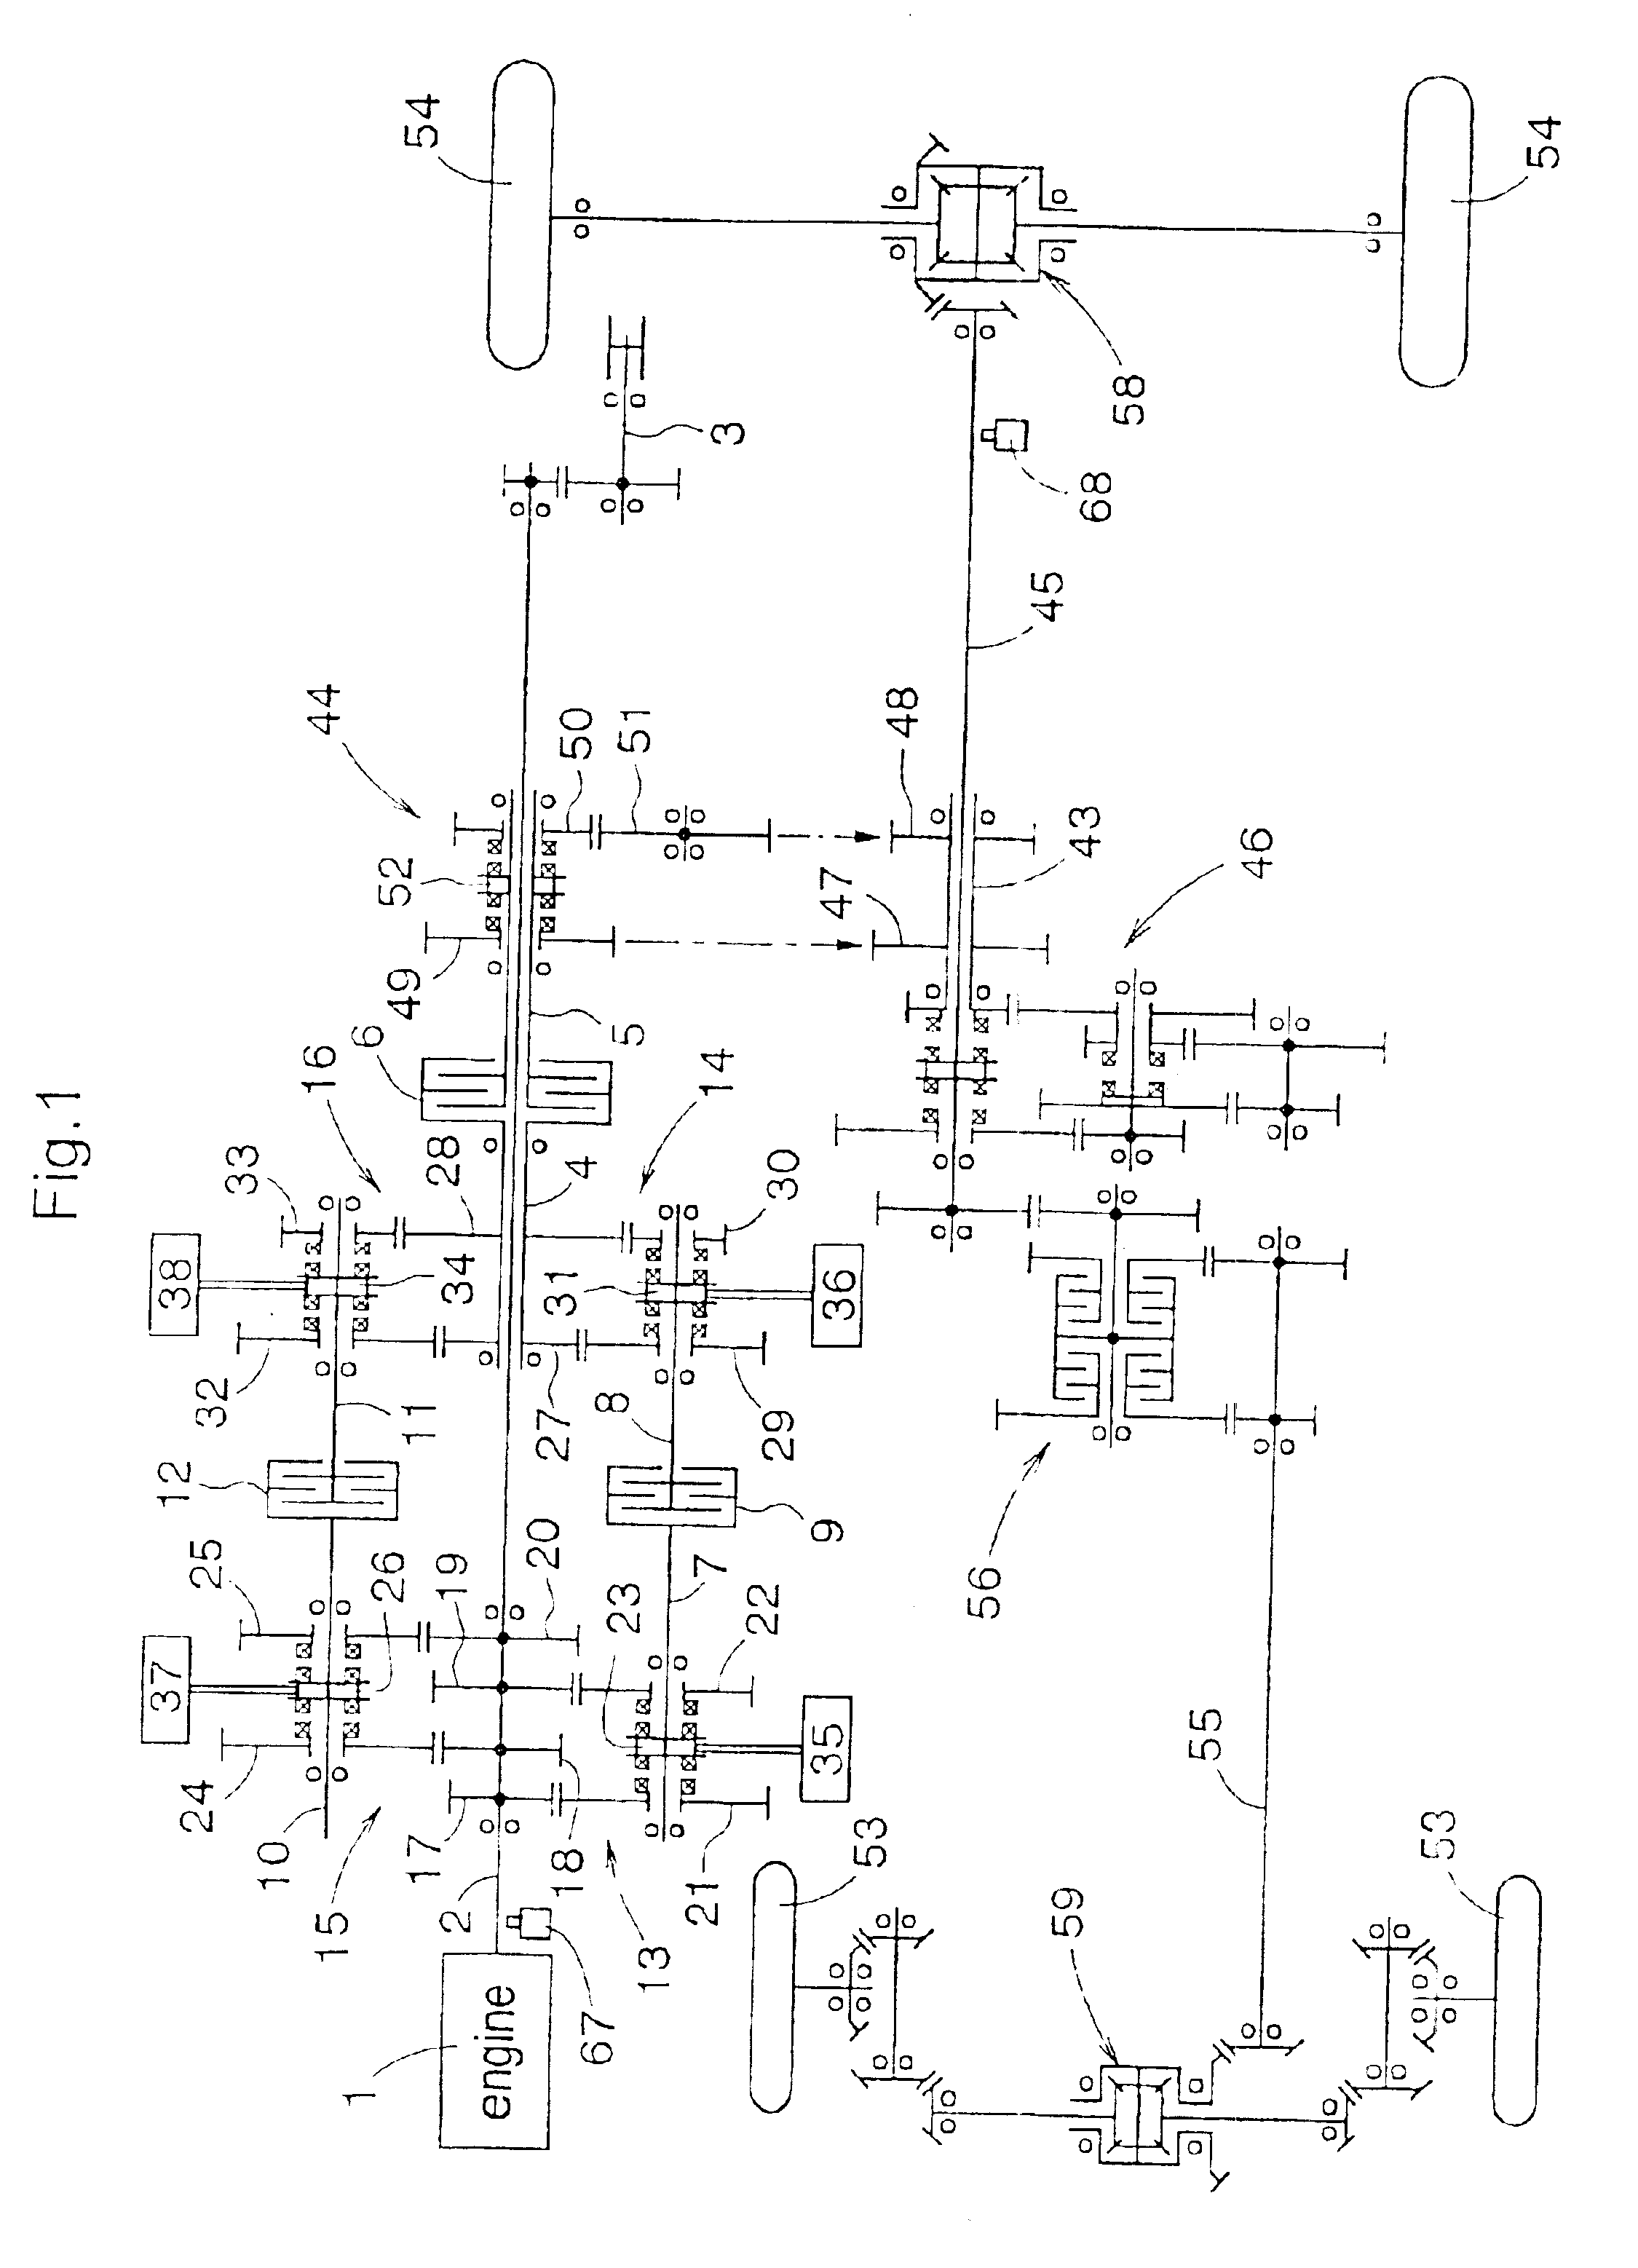 Control apparatus for transmission